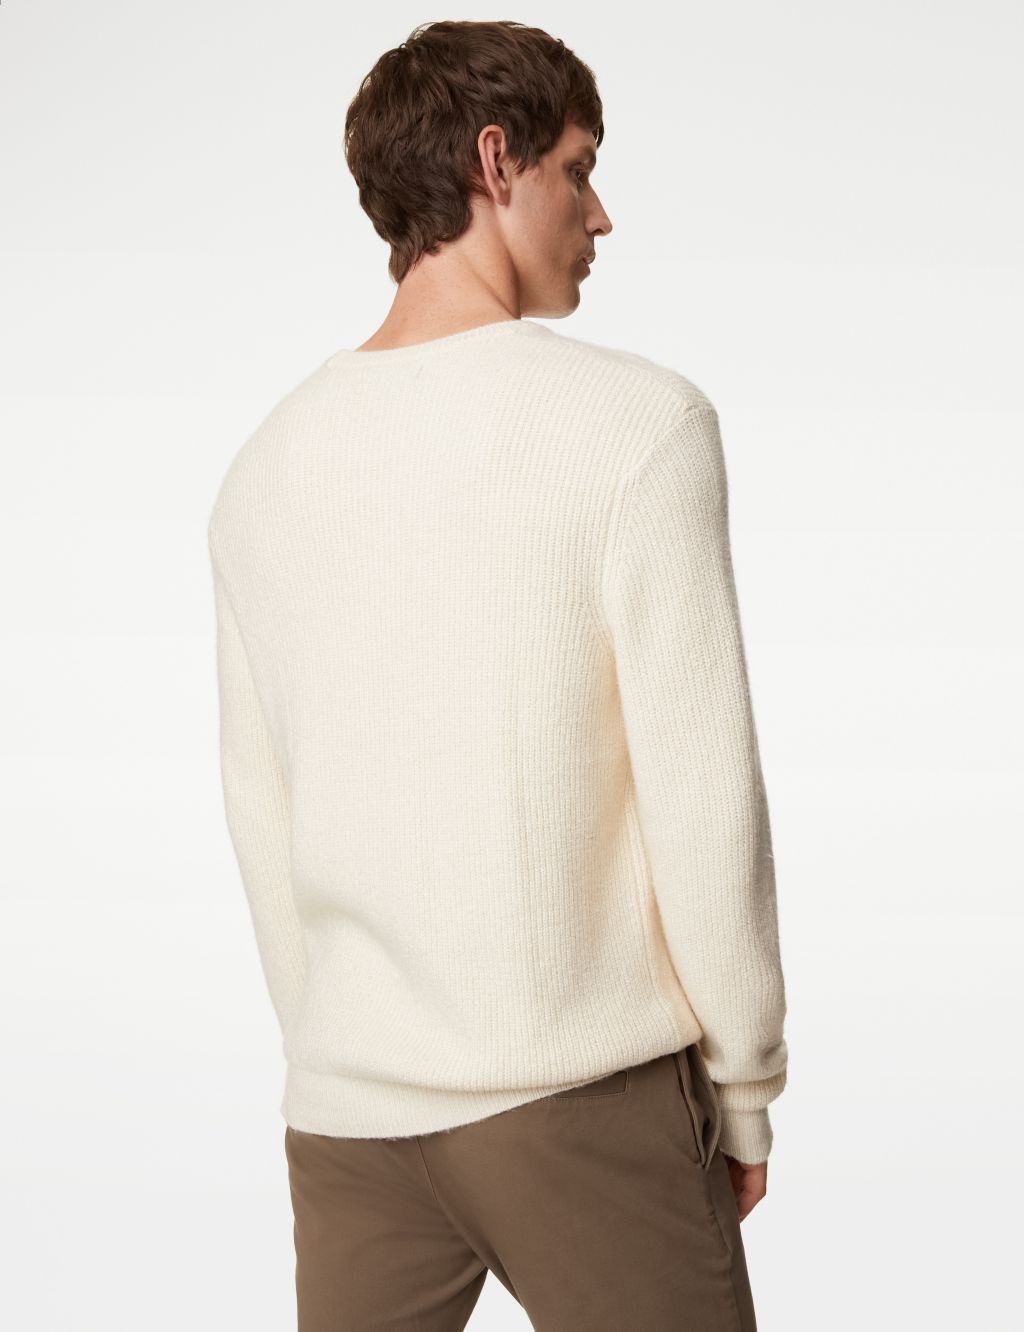 Supersoft Chunky Cable Crew Neck Jumper image 5